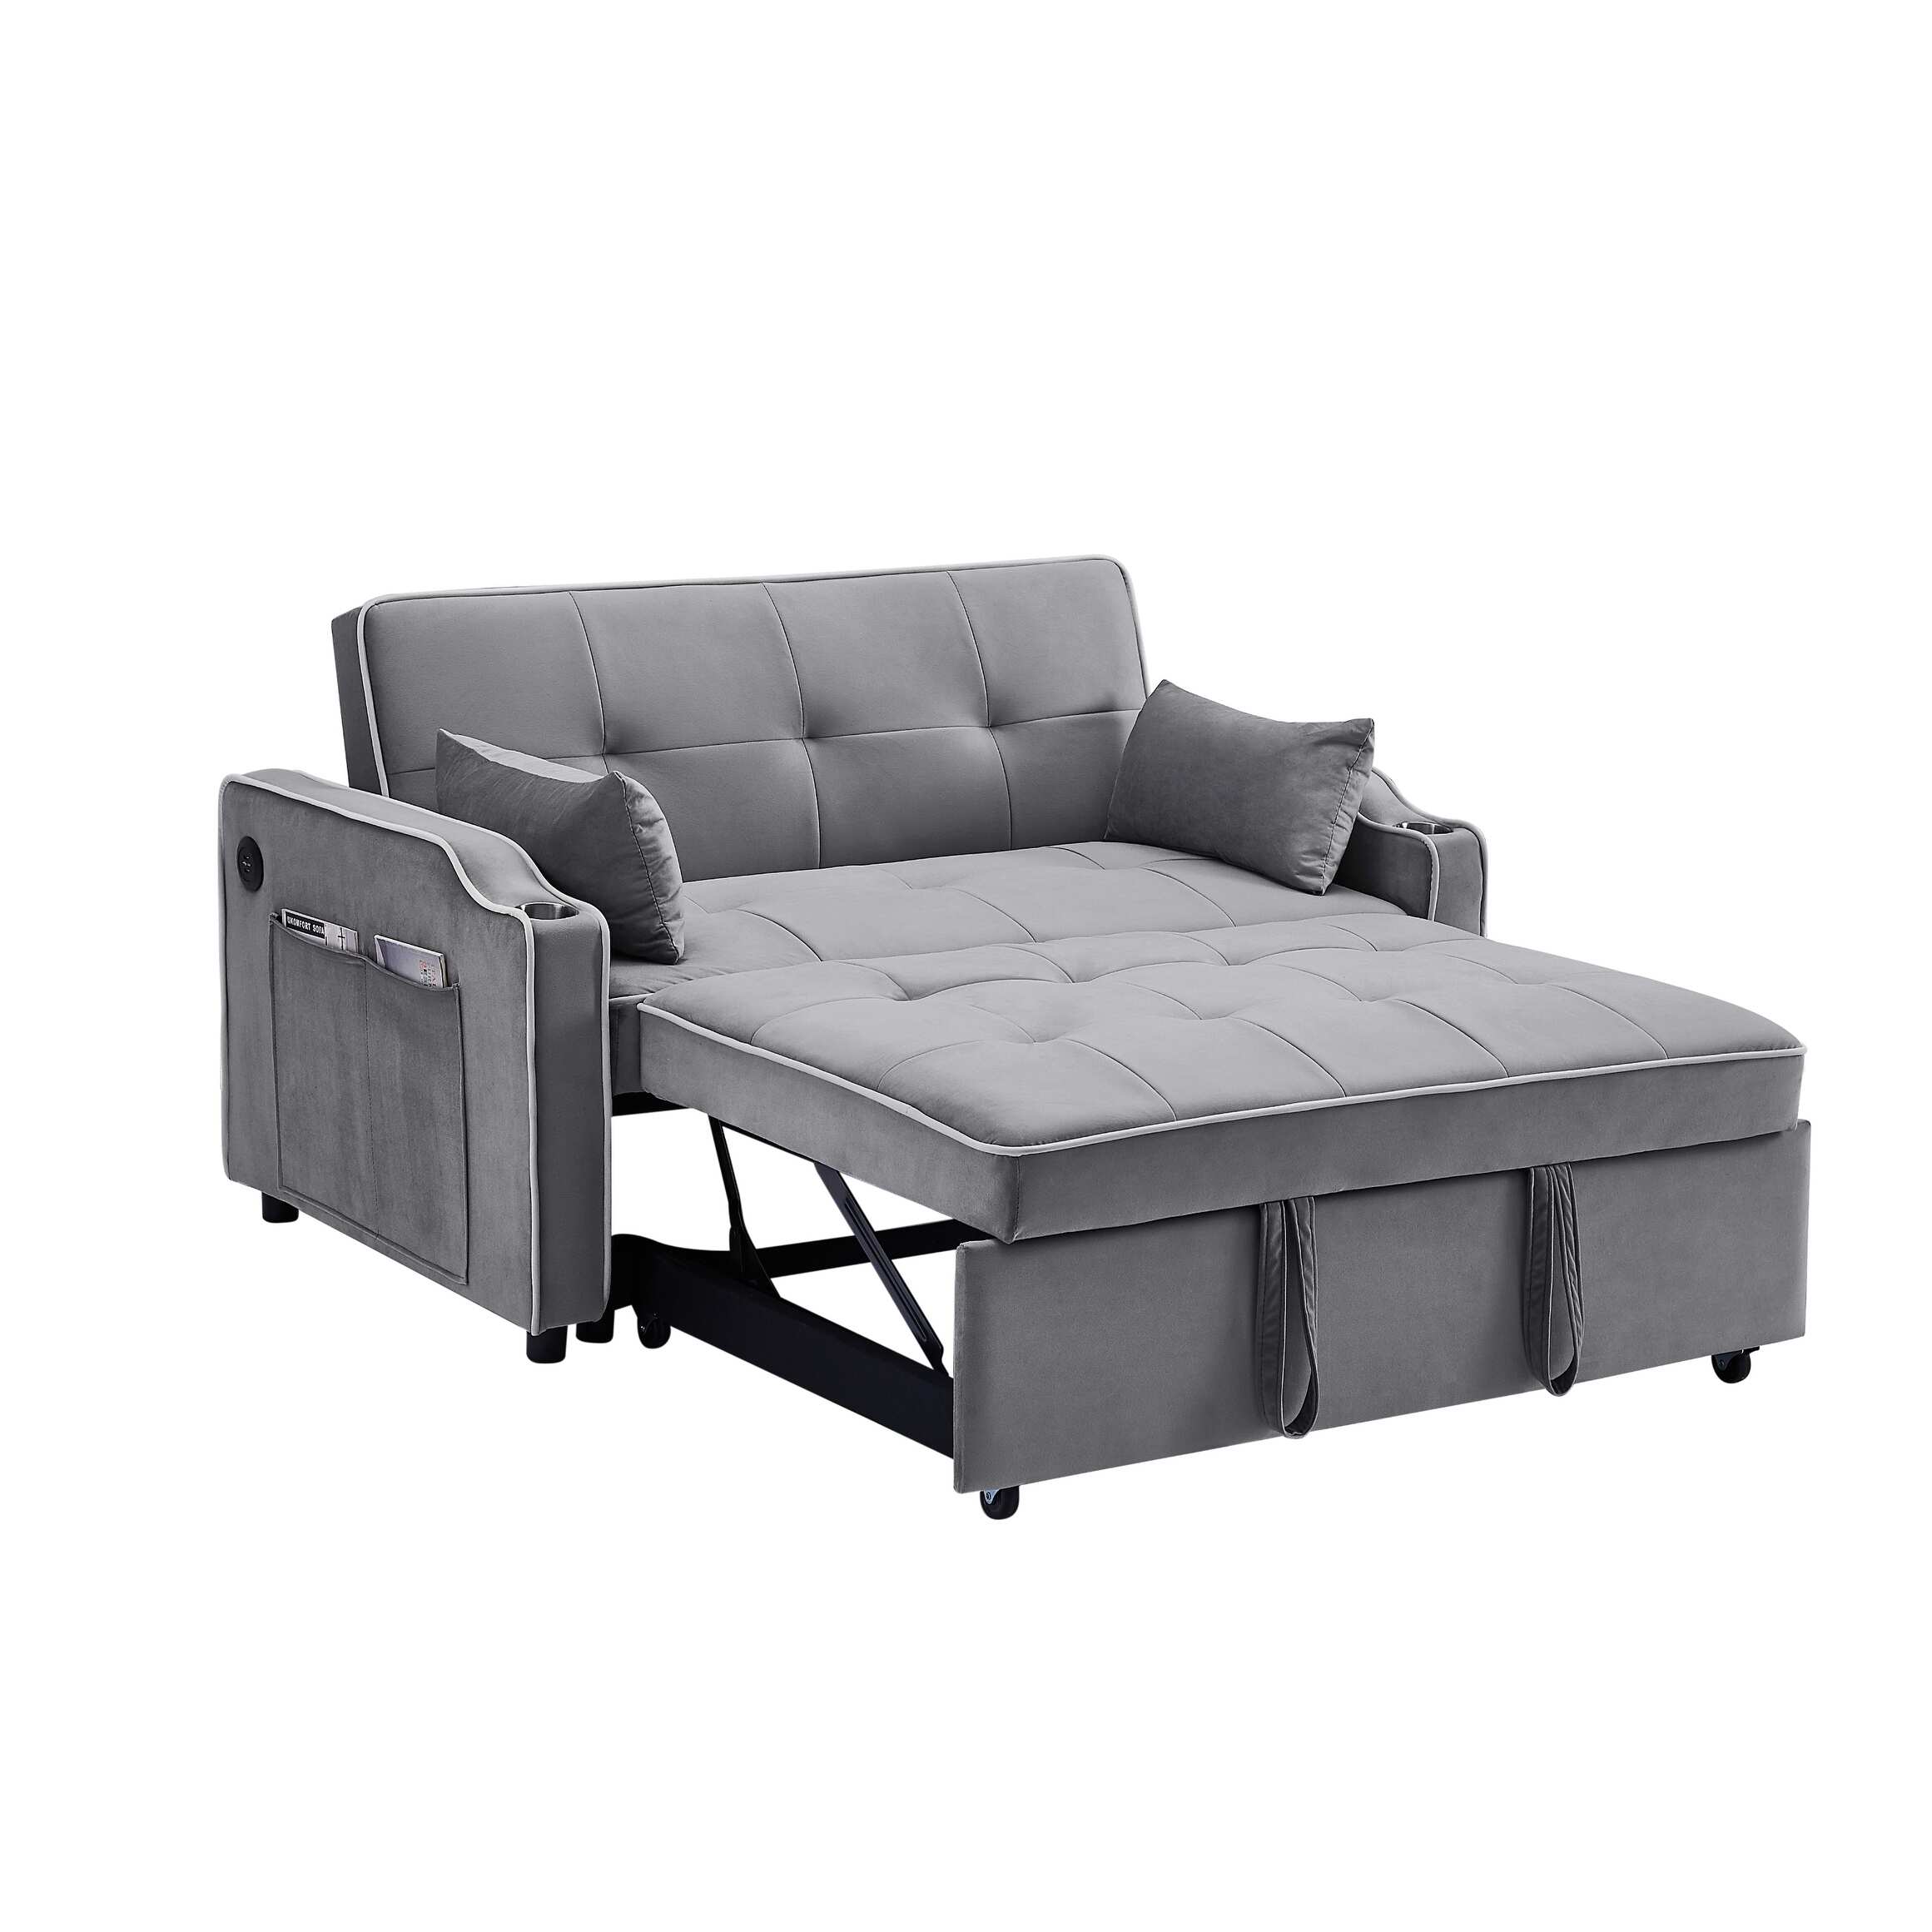 Ouyessir 3 in 1 Multi-Functional Convertible Sleeper Sofa Bed